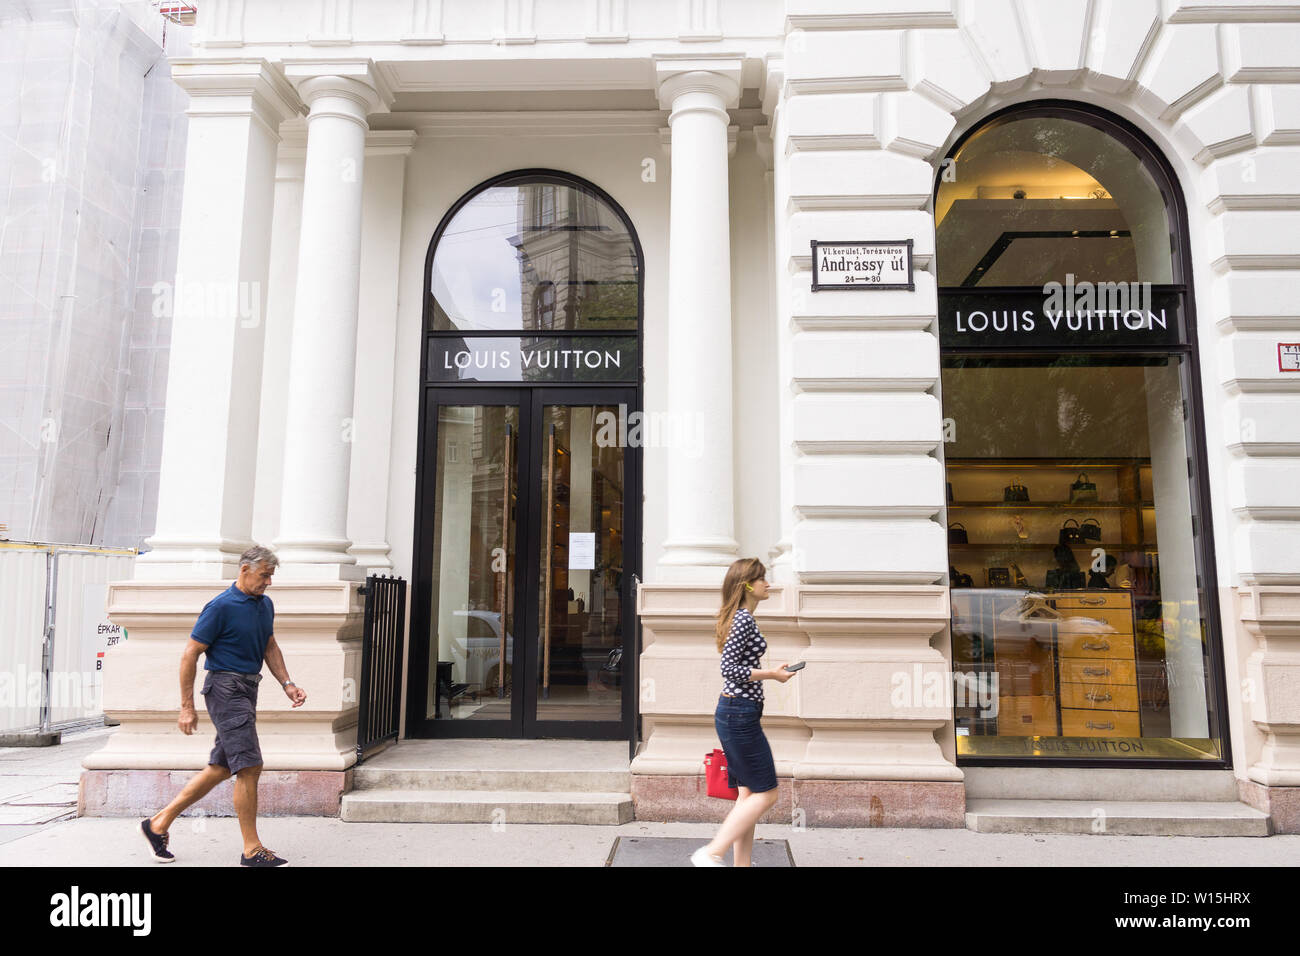 Louis Vuitton Store Budapest Hungary High Resolution Stock Photography and  Images - Alamy